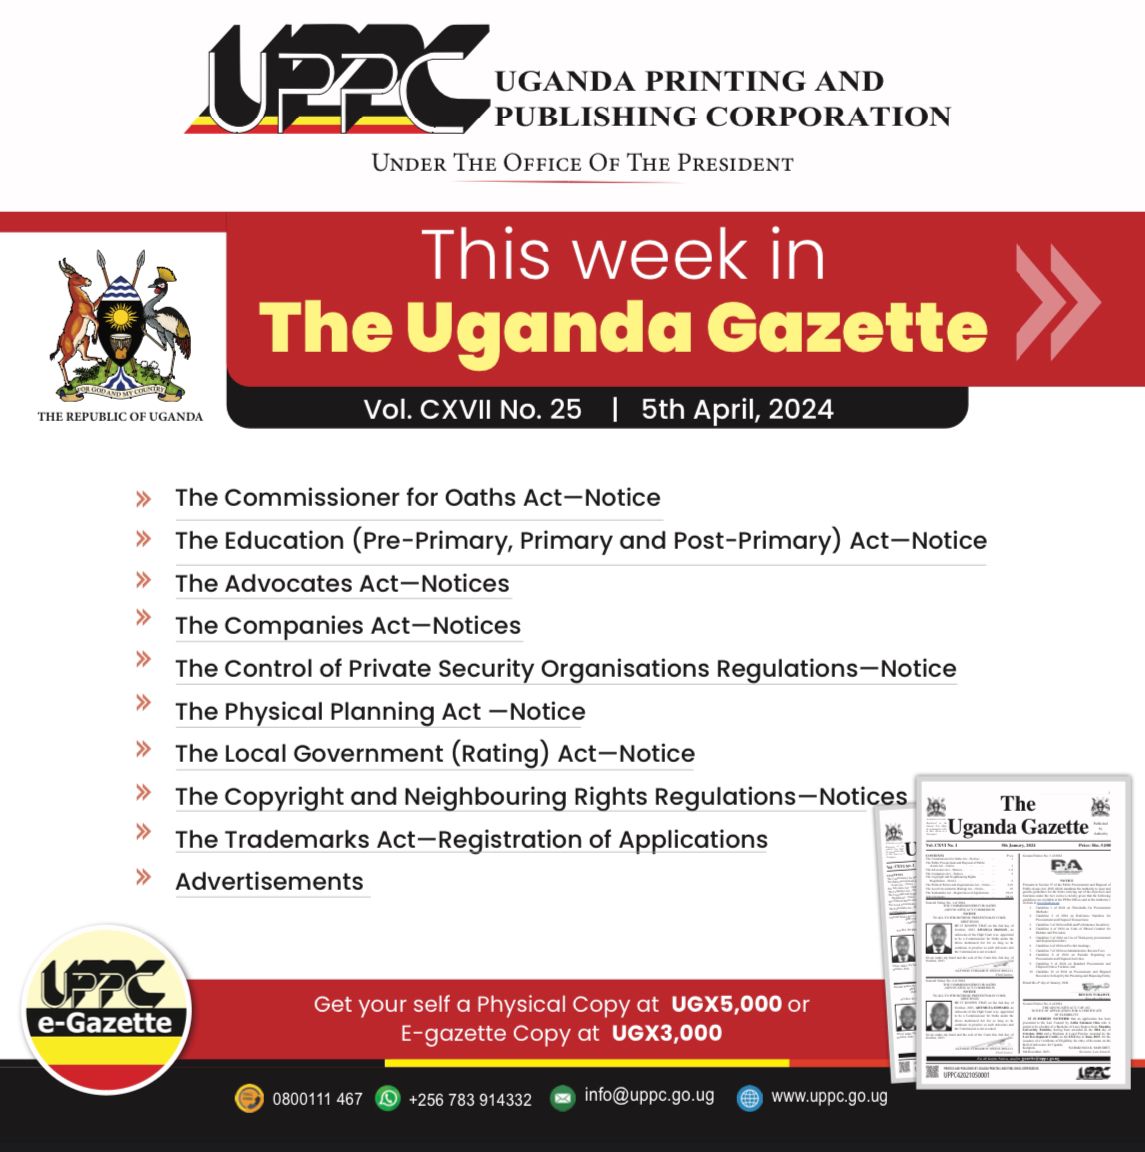 Grab your latest issue of the Uganda Gazette this week 👇. Don't forget to visit uppc.go.ug to access and subscribe to the E-Gazette💪